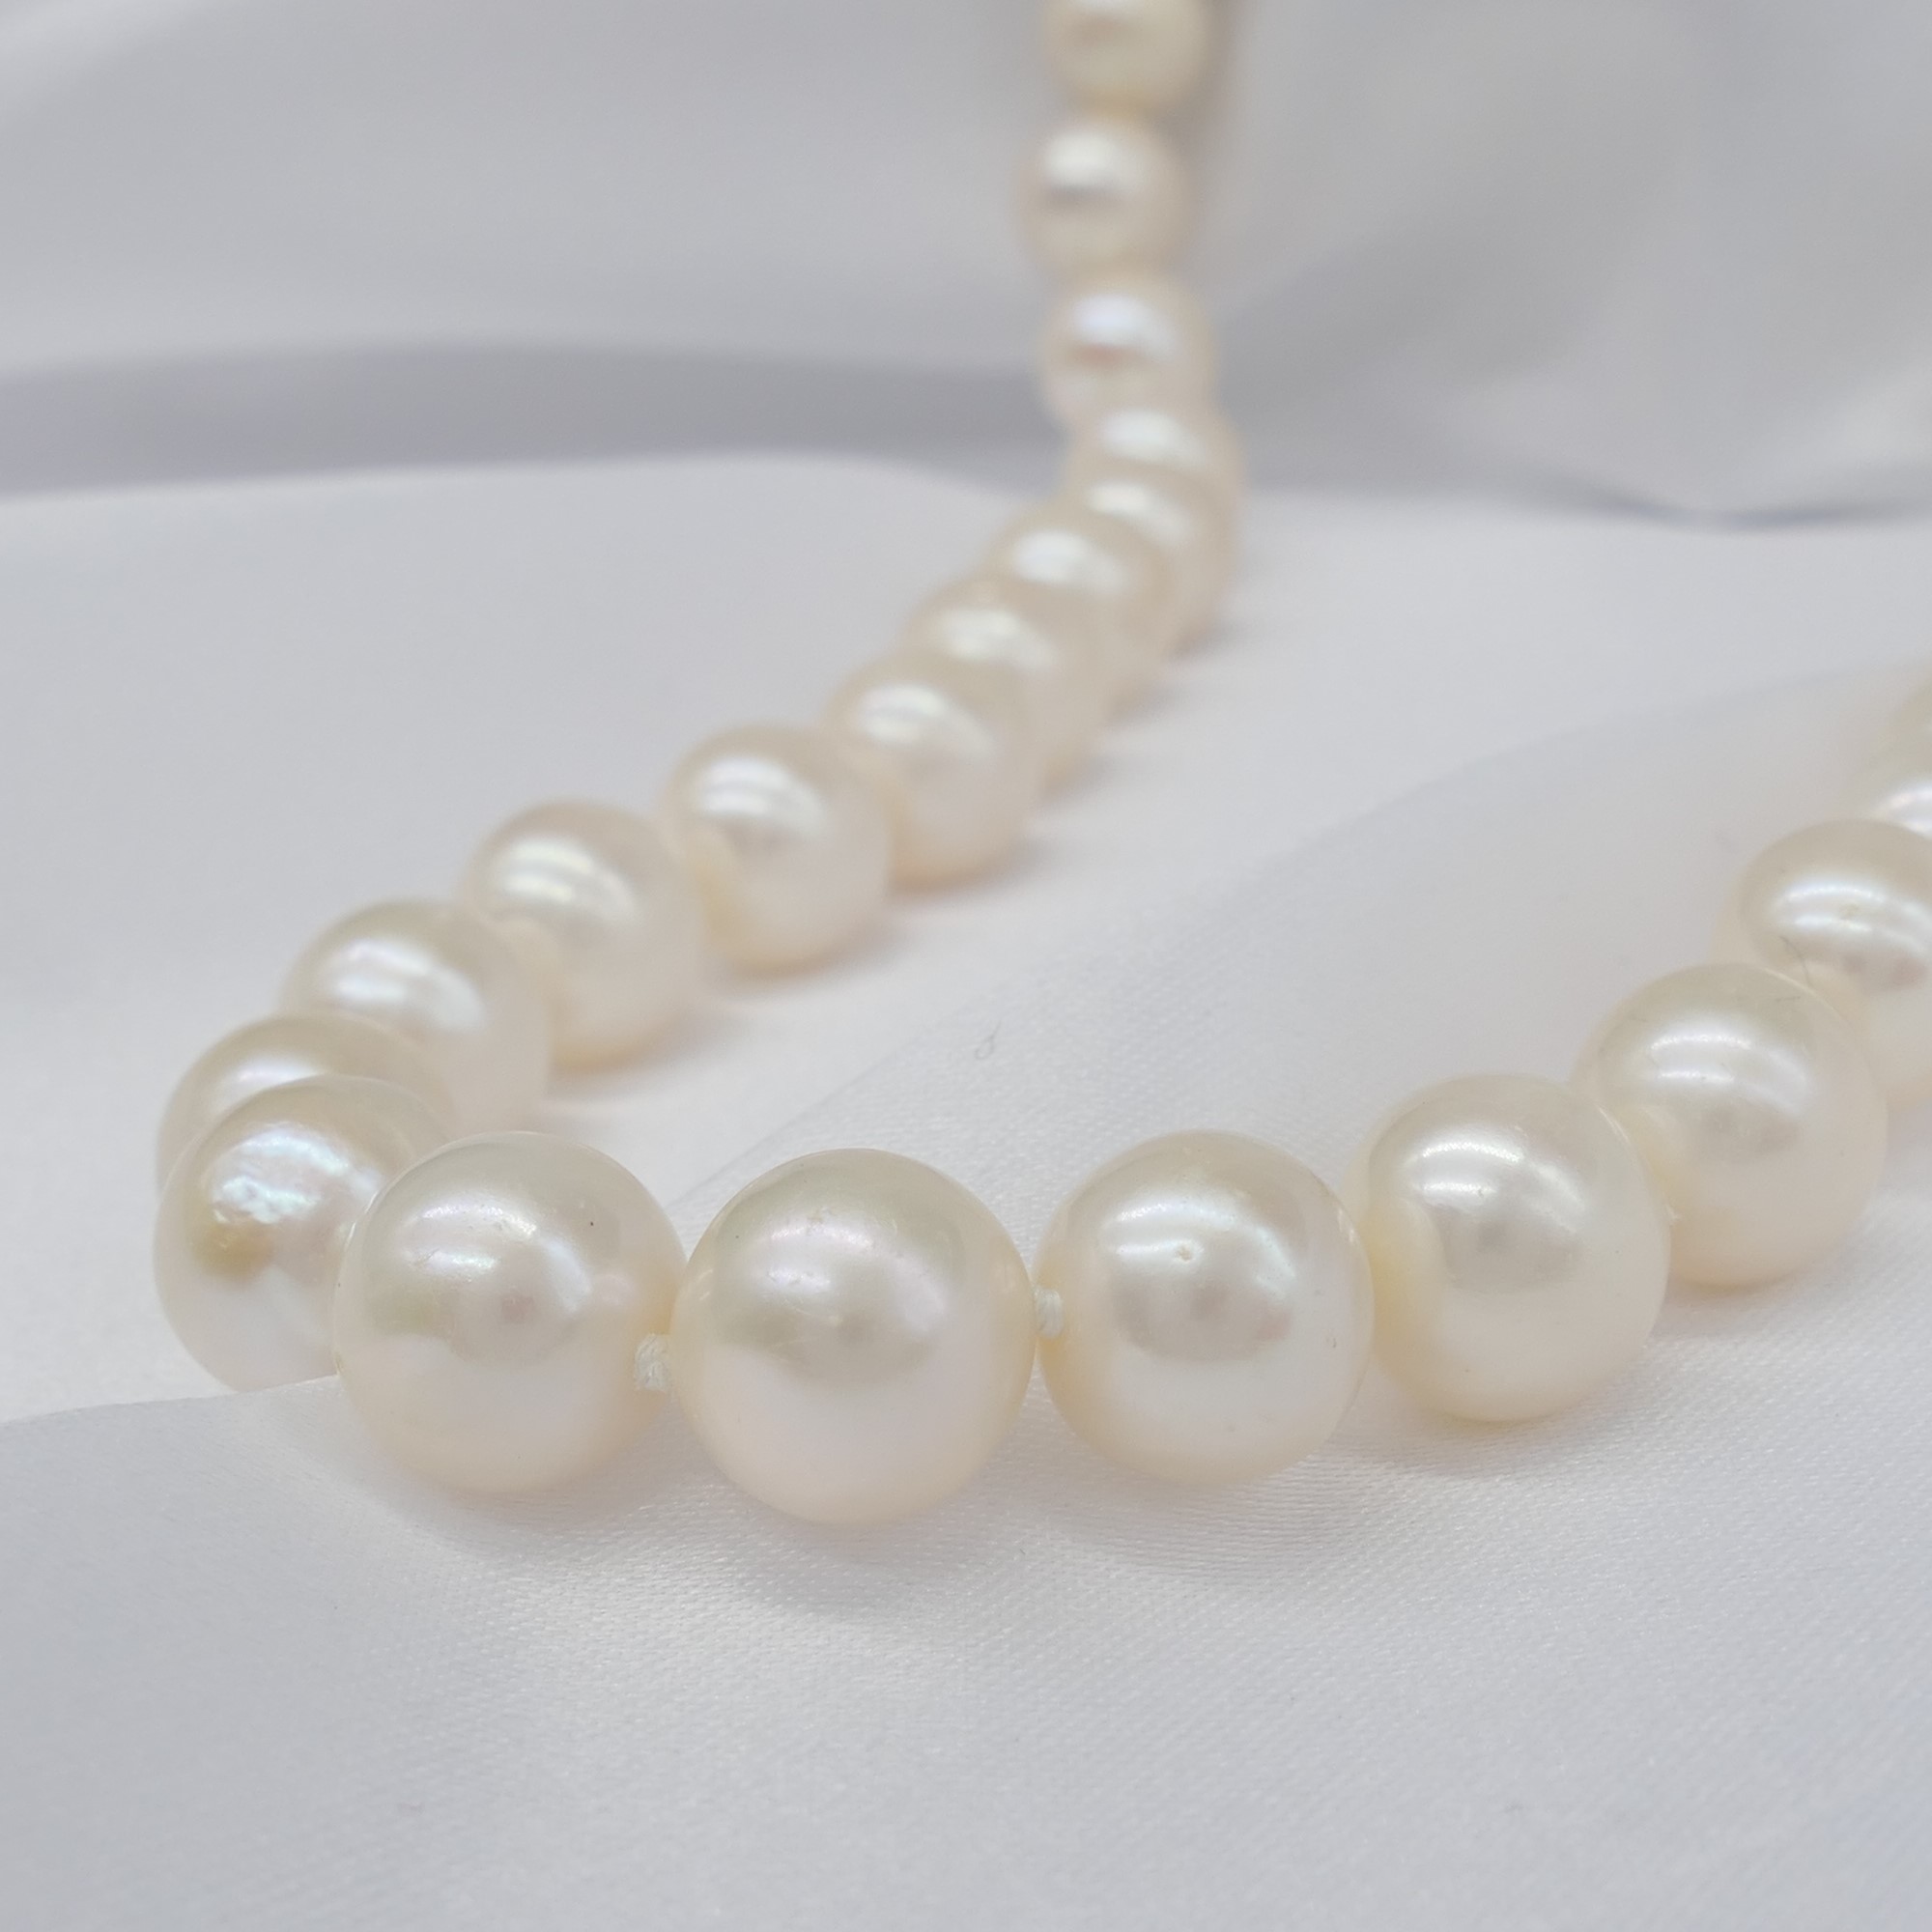 Freshwater Cultured Pearl Necklace With A Yellow Gold Ball Clasp - Image 2 of 6